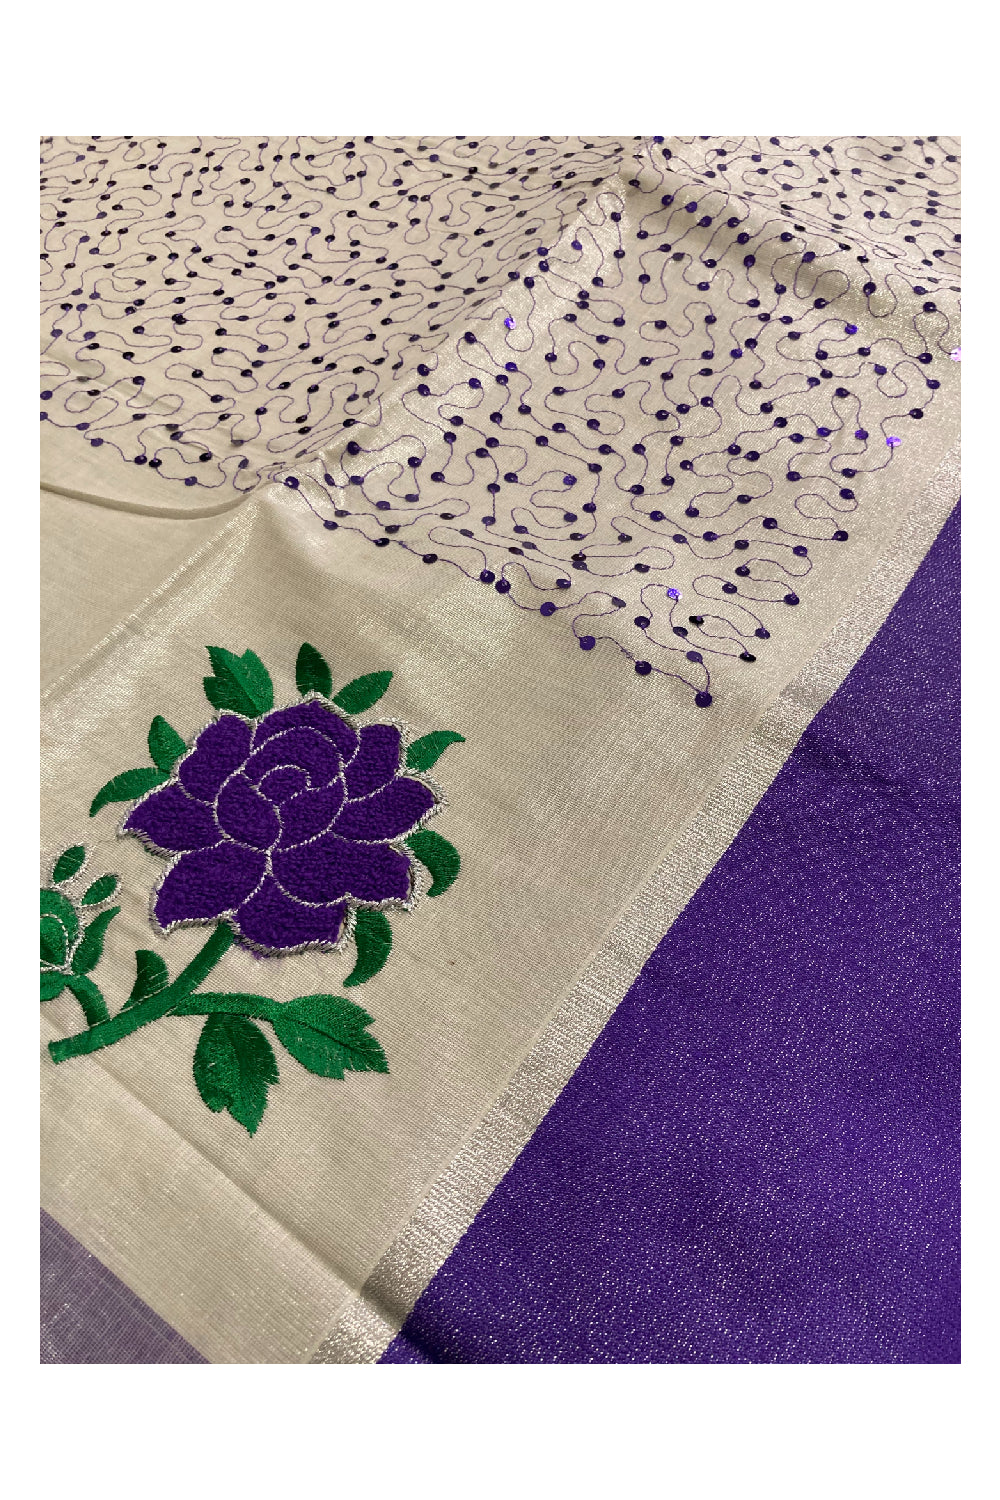 Silver Tissue Kasavu Saree with Violet Floral and Sequins Decorative Work